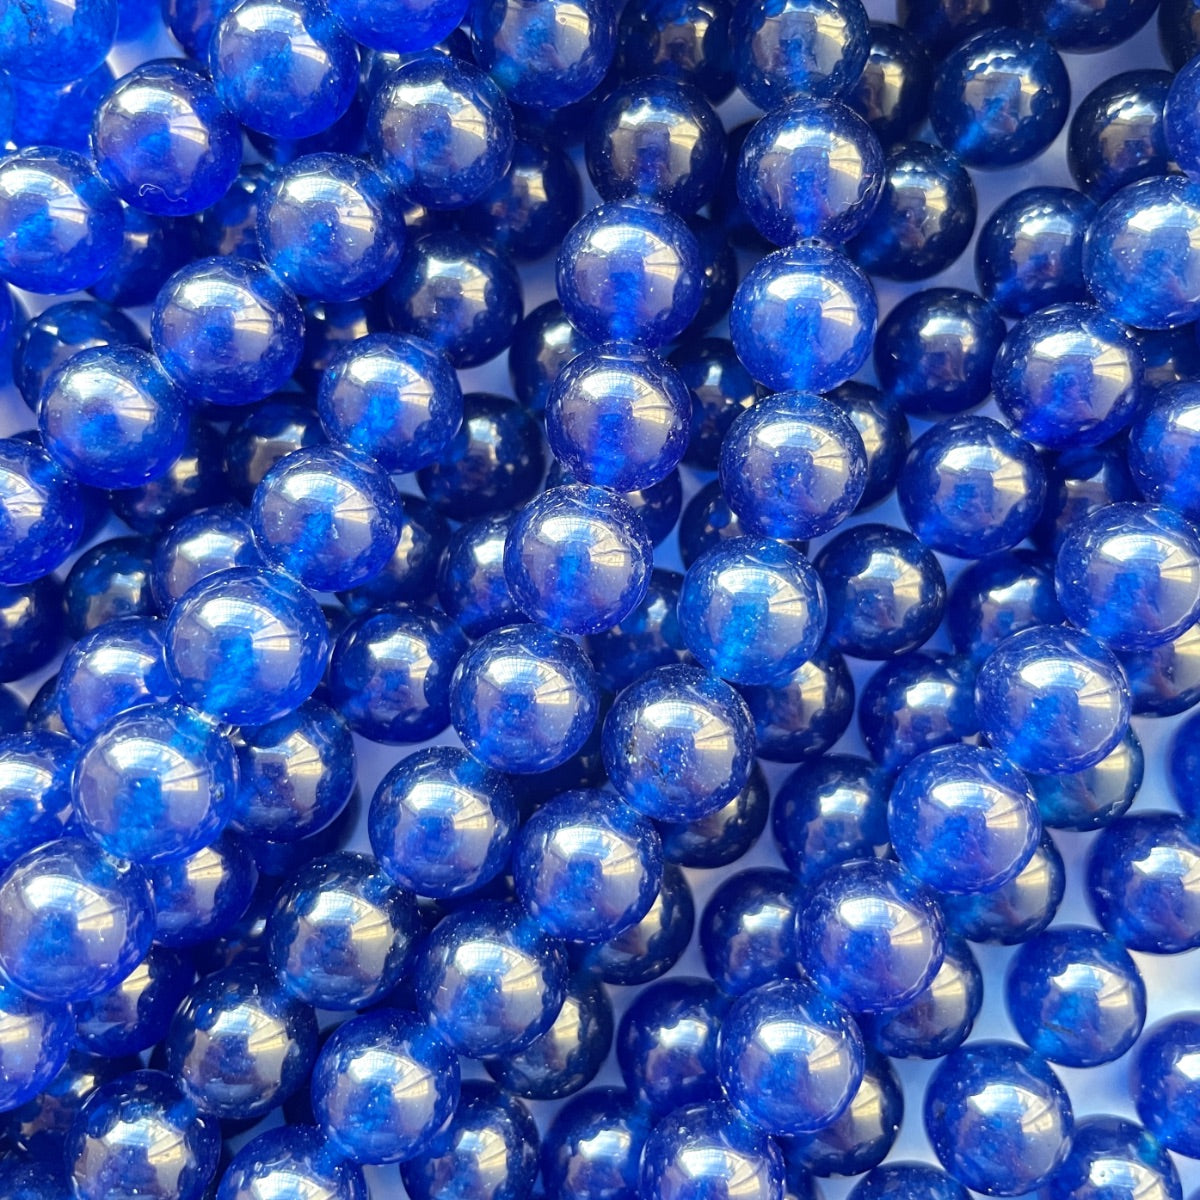 2 Strands/lot 10mm Colorful Candy Color Jade Stone Round Beads Navy Blue Stone Beads New Beads Arrivals Round Jade Beads Charms Beads Beyond